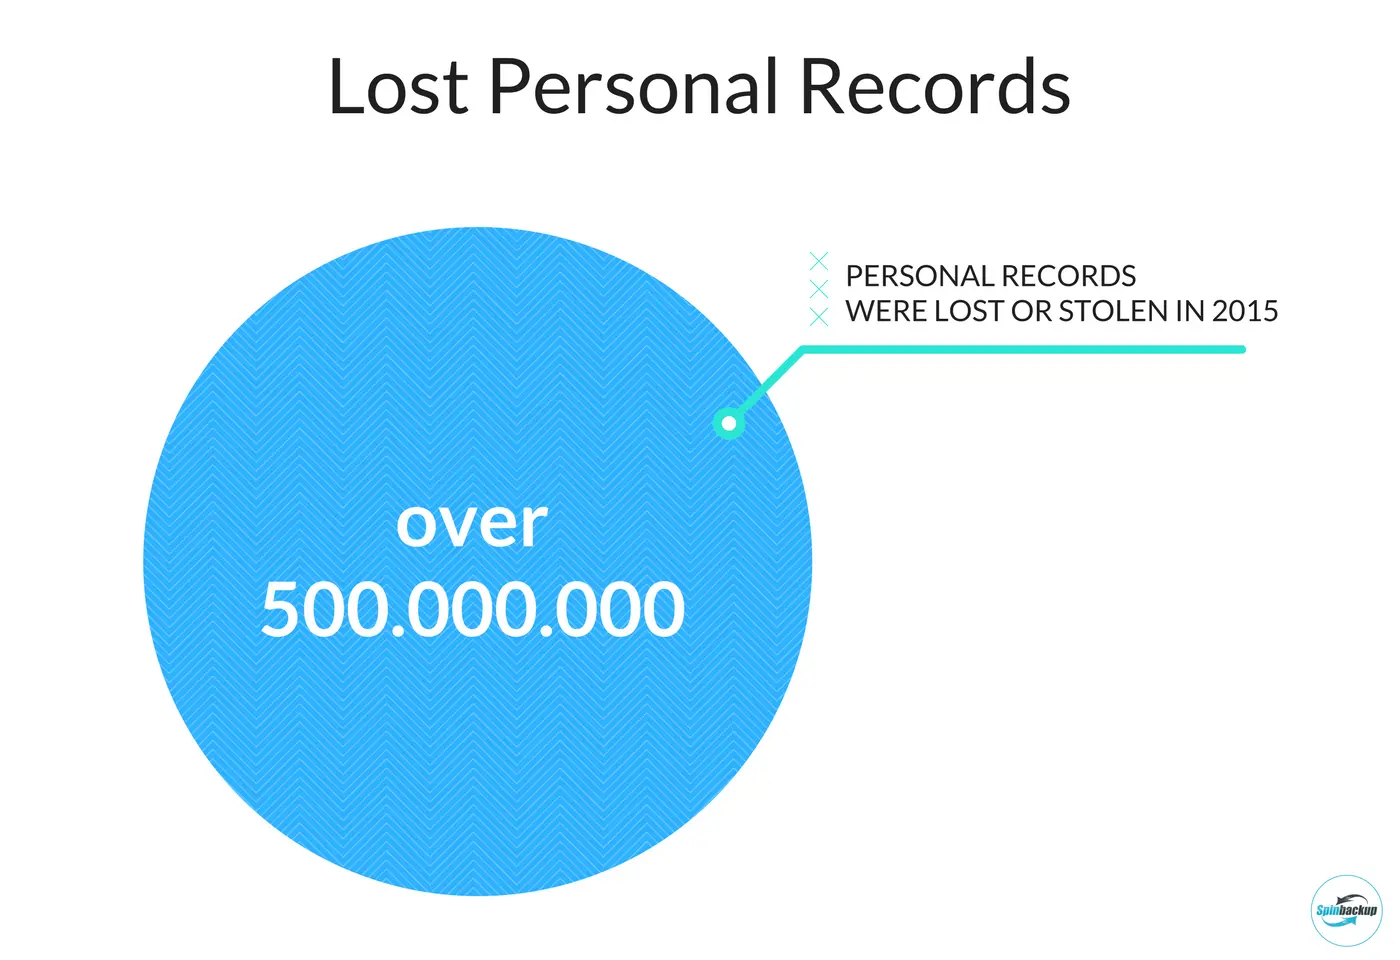 Lost personal records